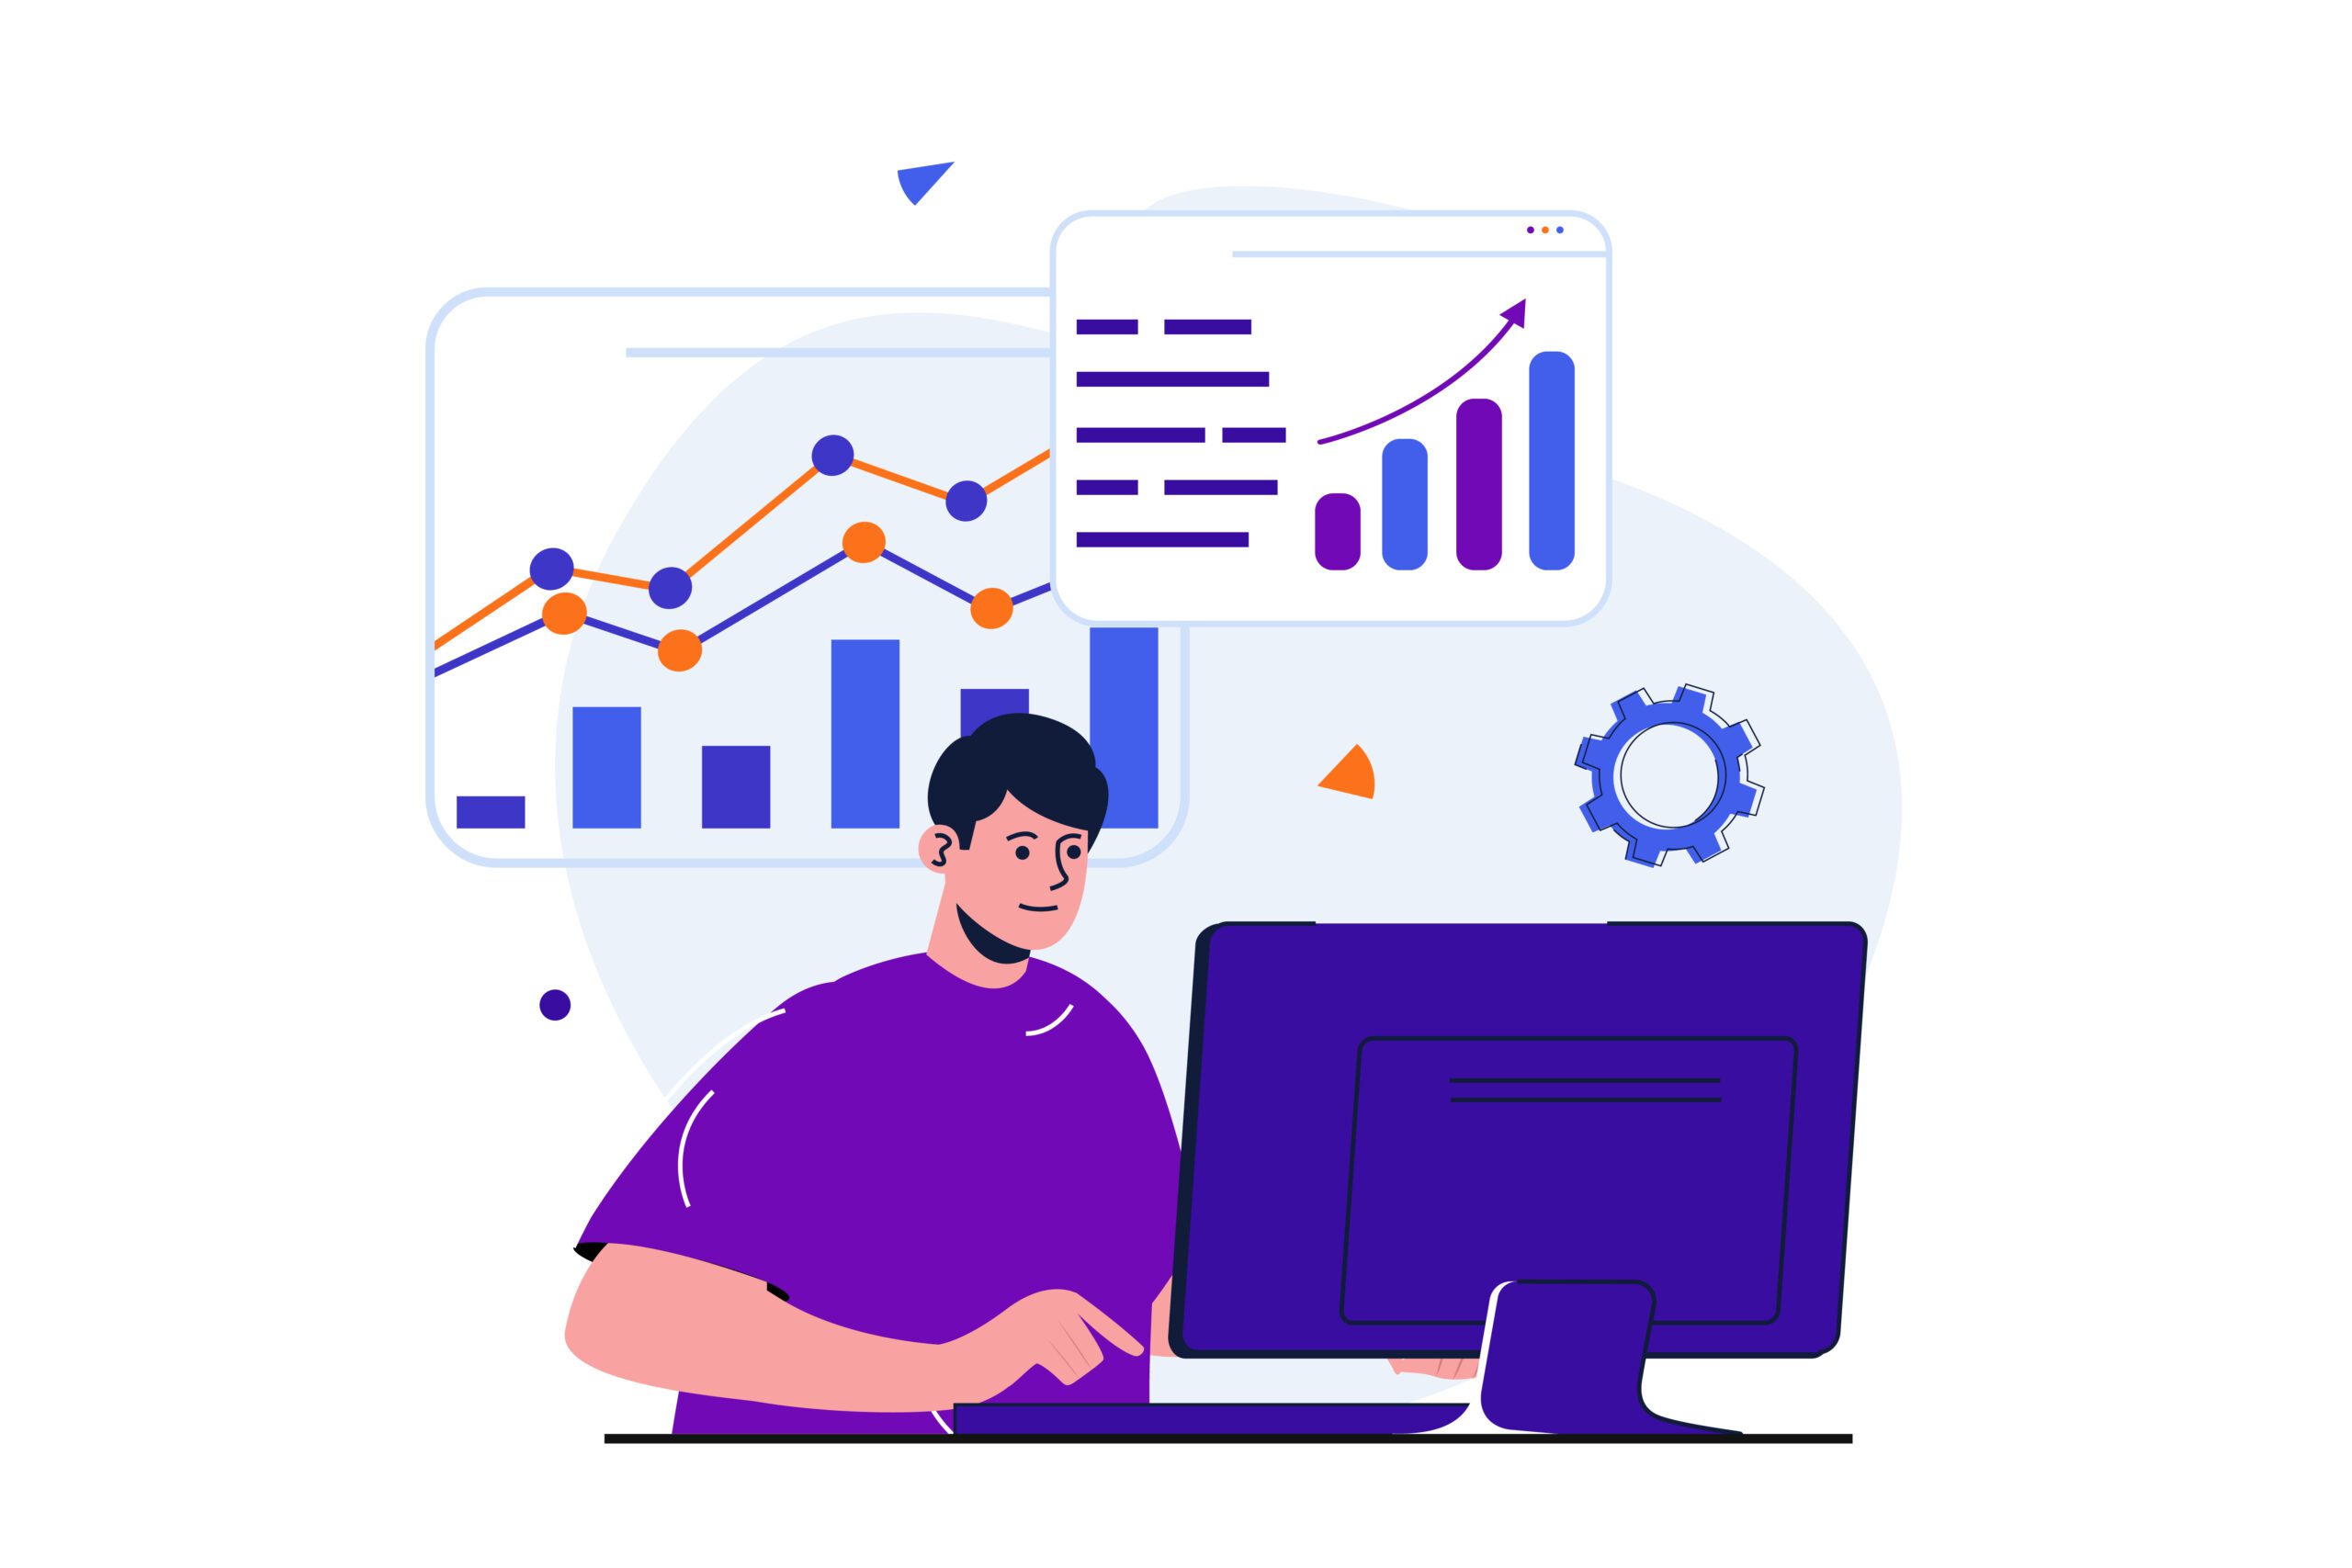 Marketing modern flat concept for web banner design. Man analyzes data, studies graphs and develops strategy and marketing plan for promoting business. Vector illustration with isolated people scene